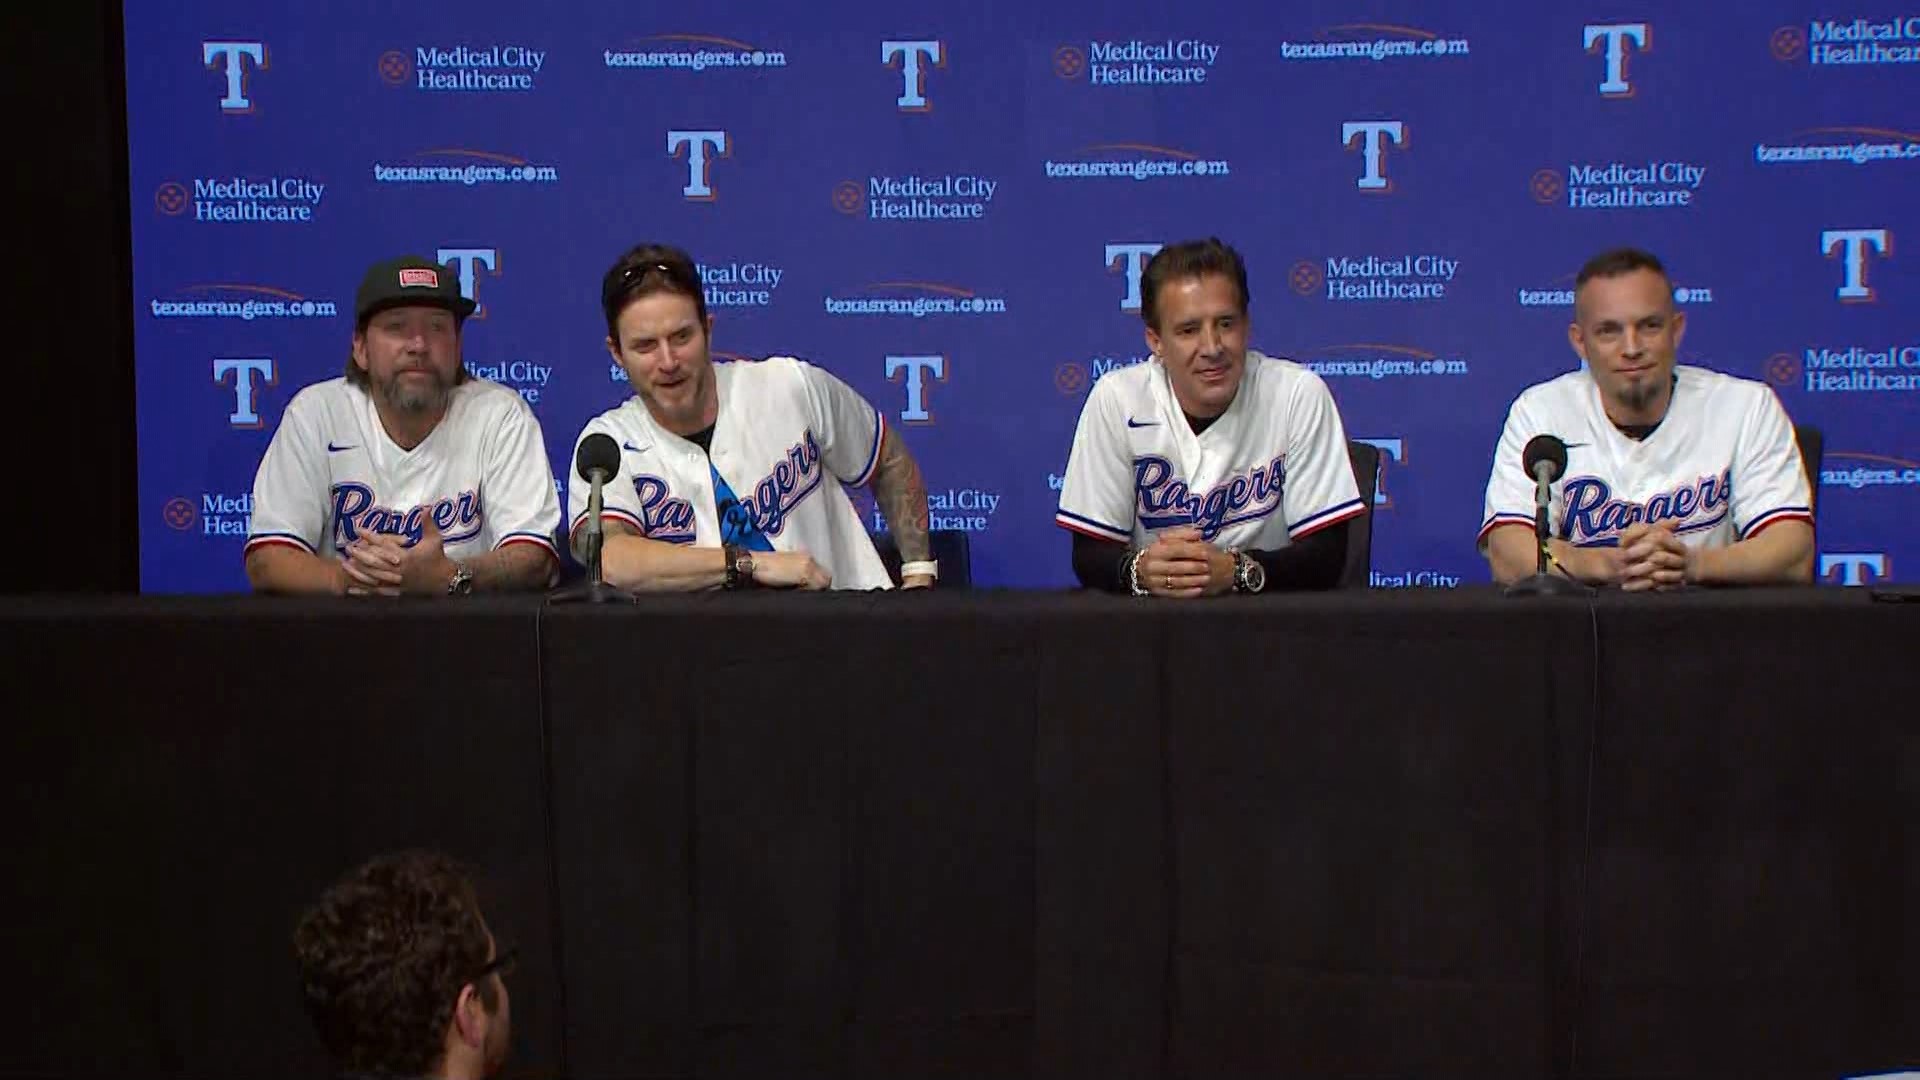 Creed band members held a press conference in Texas Rangers gear at Game 3 of the ALCS.